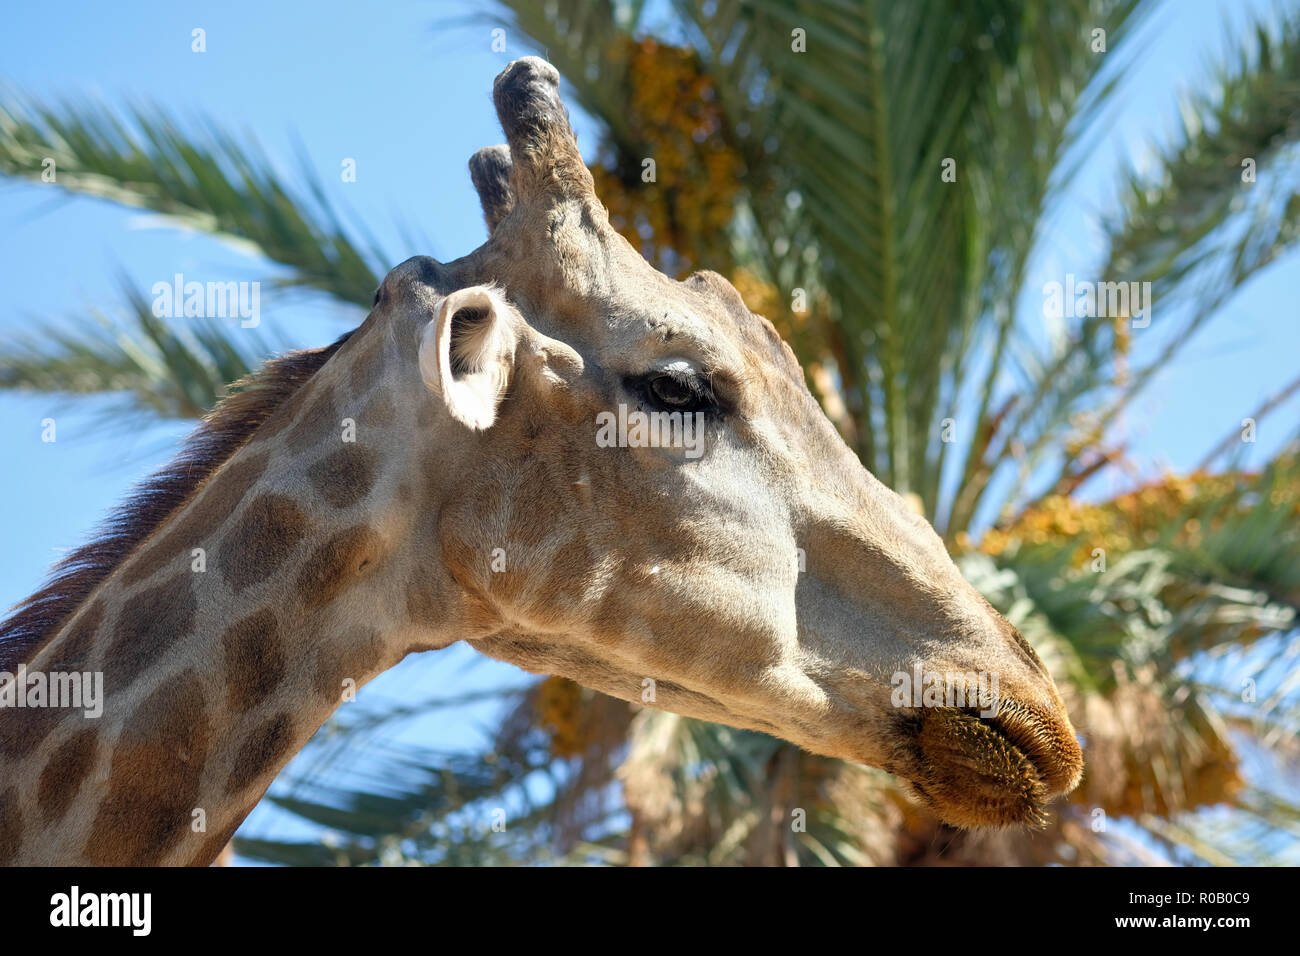 Close up profile muzzle of giraffe against blue sunny sky and palm tree lush leaves. Spain Stock Photo